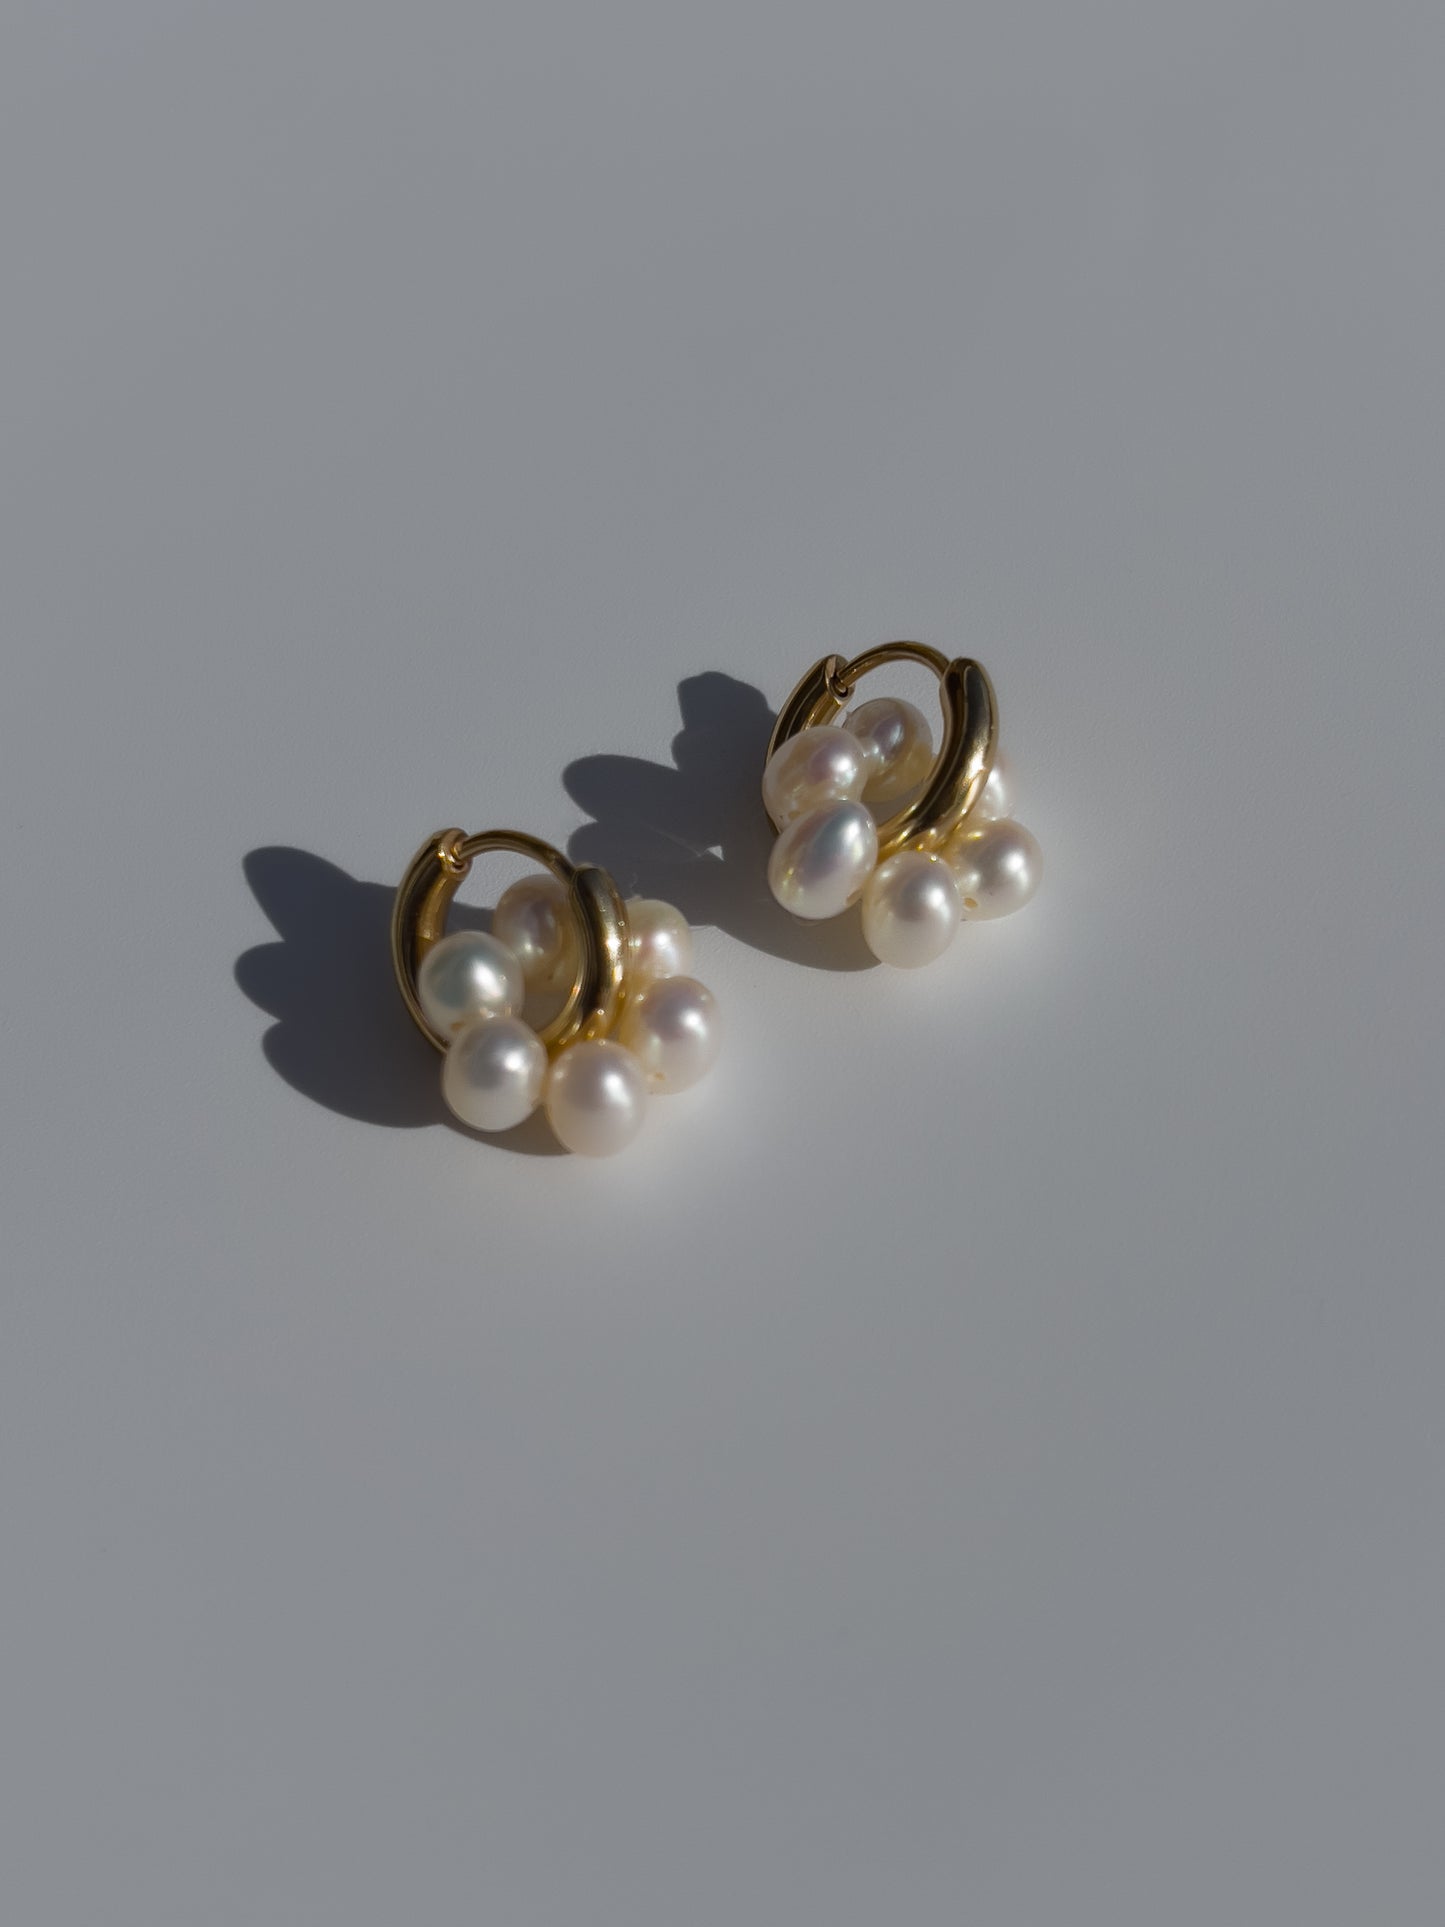 Pearl Halo Hoops - 14 karat Gold Filled Hoops, each suspending a halo of freshwater pearls. This ultra cute pair, can be worn singularly, or combined with other pieces.y